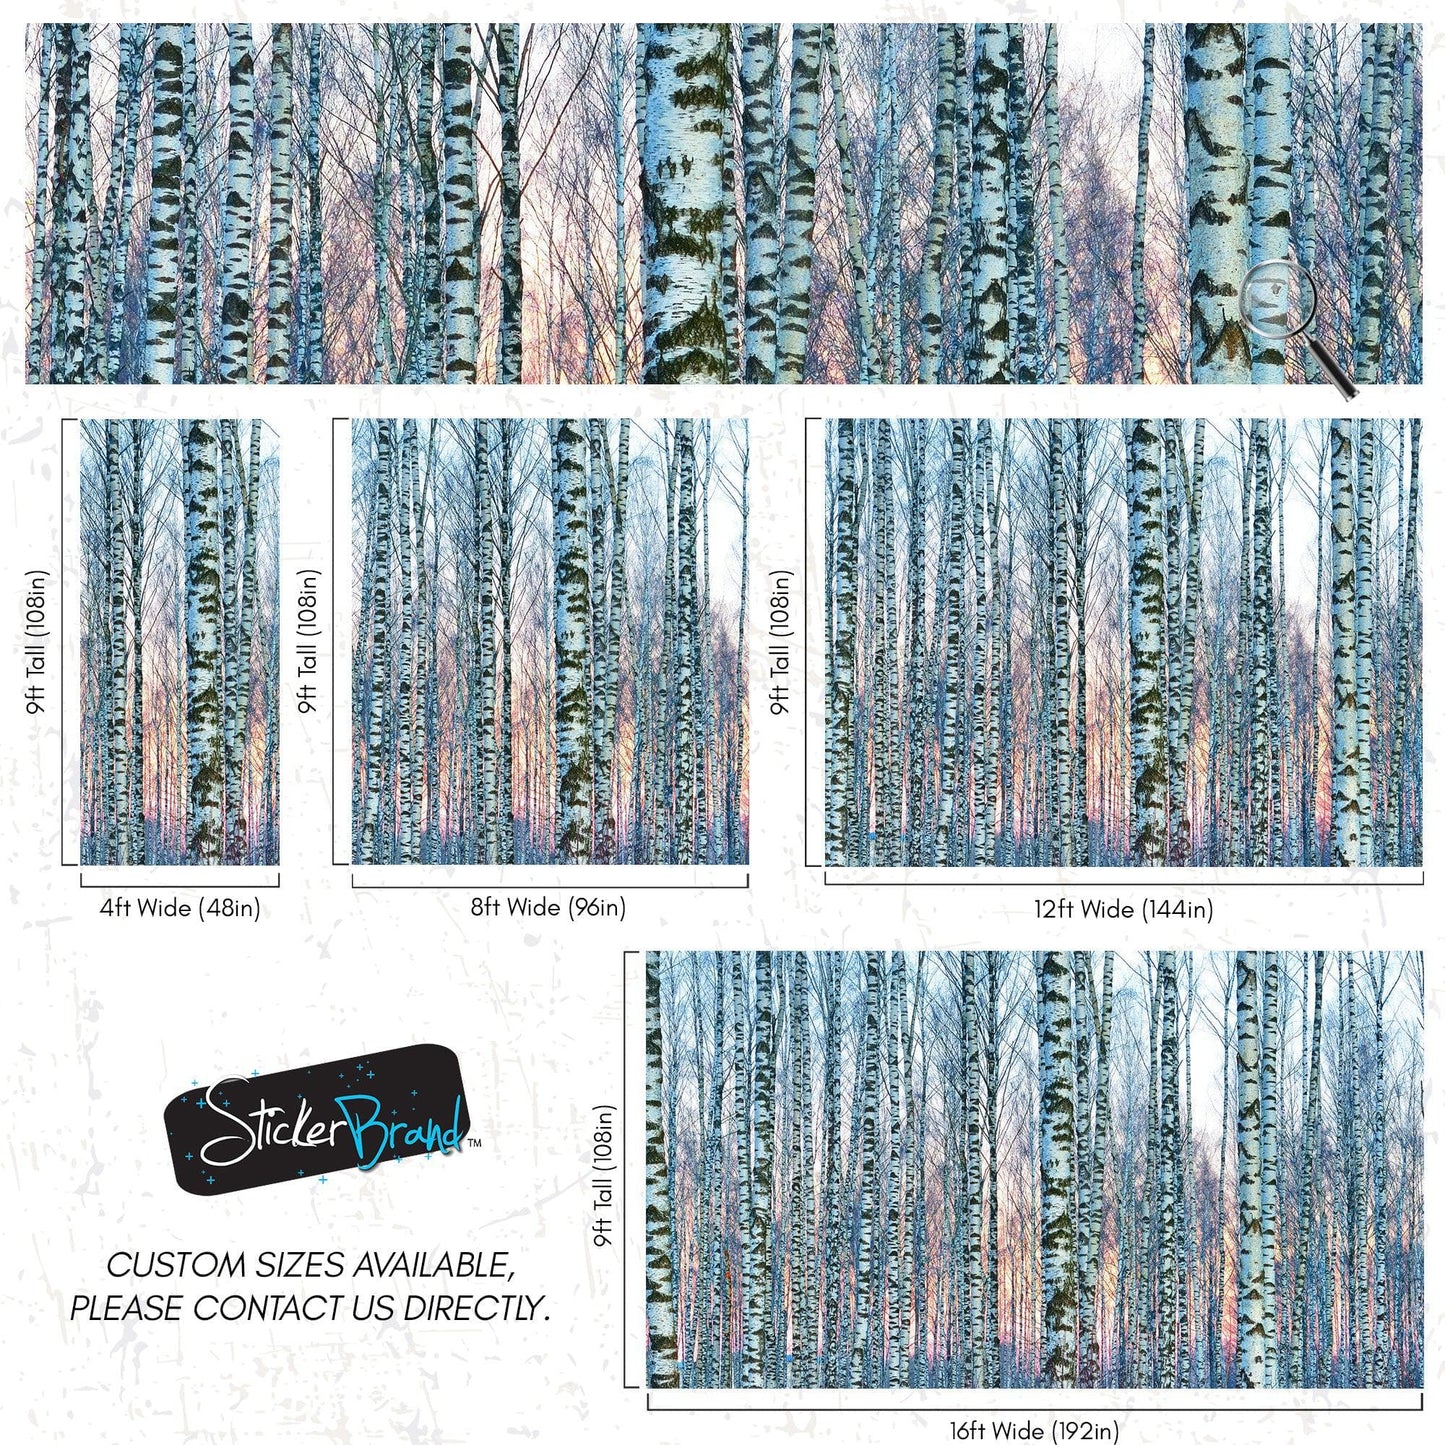 White Birch Tree Forest Wall Mural Wallpaper. Sunset Scenery. #6246